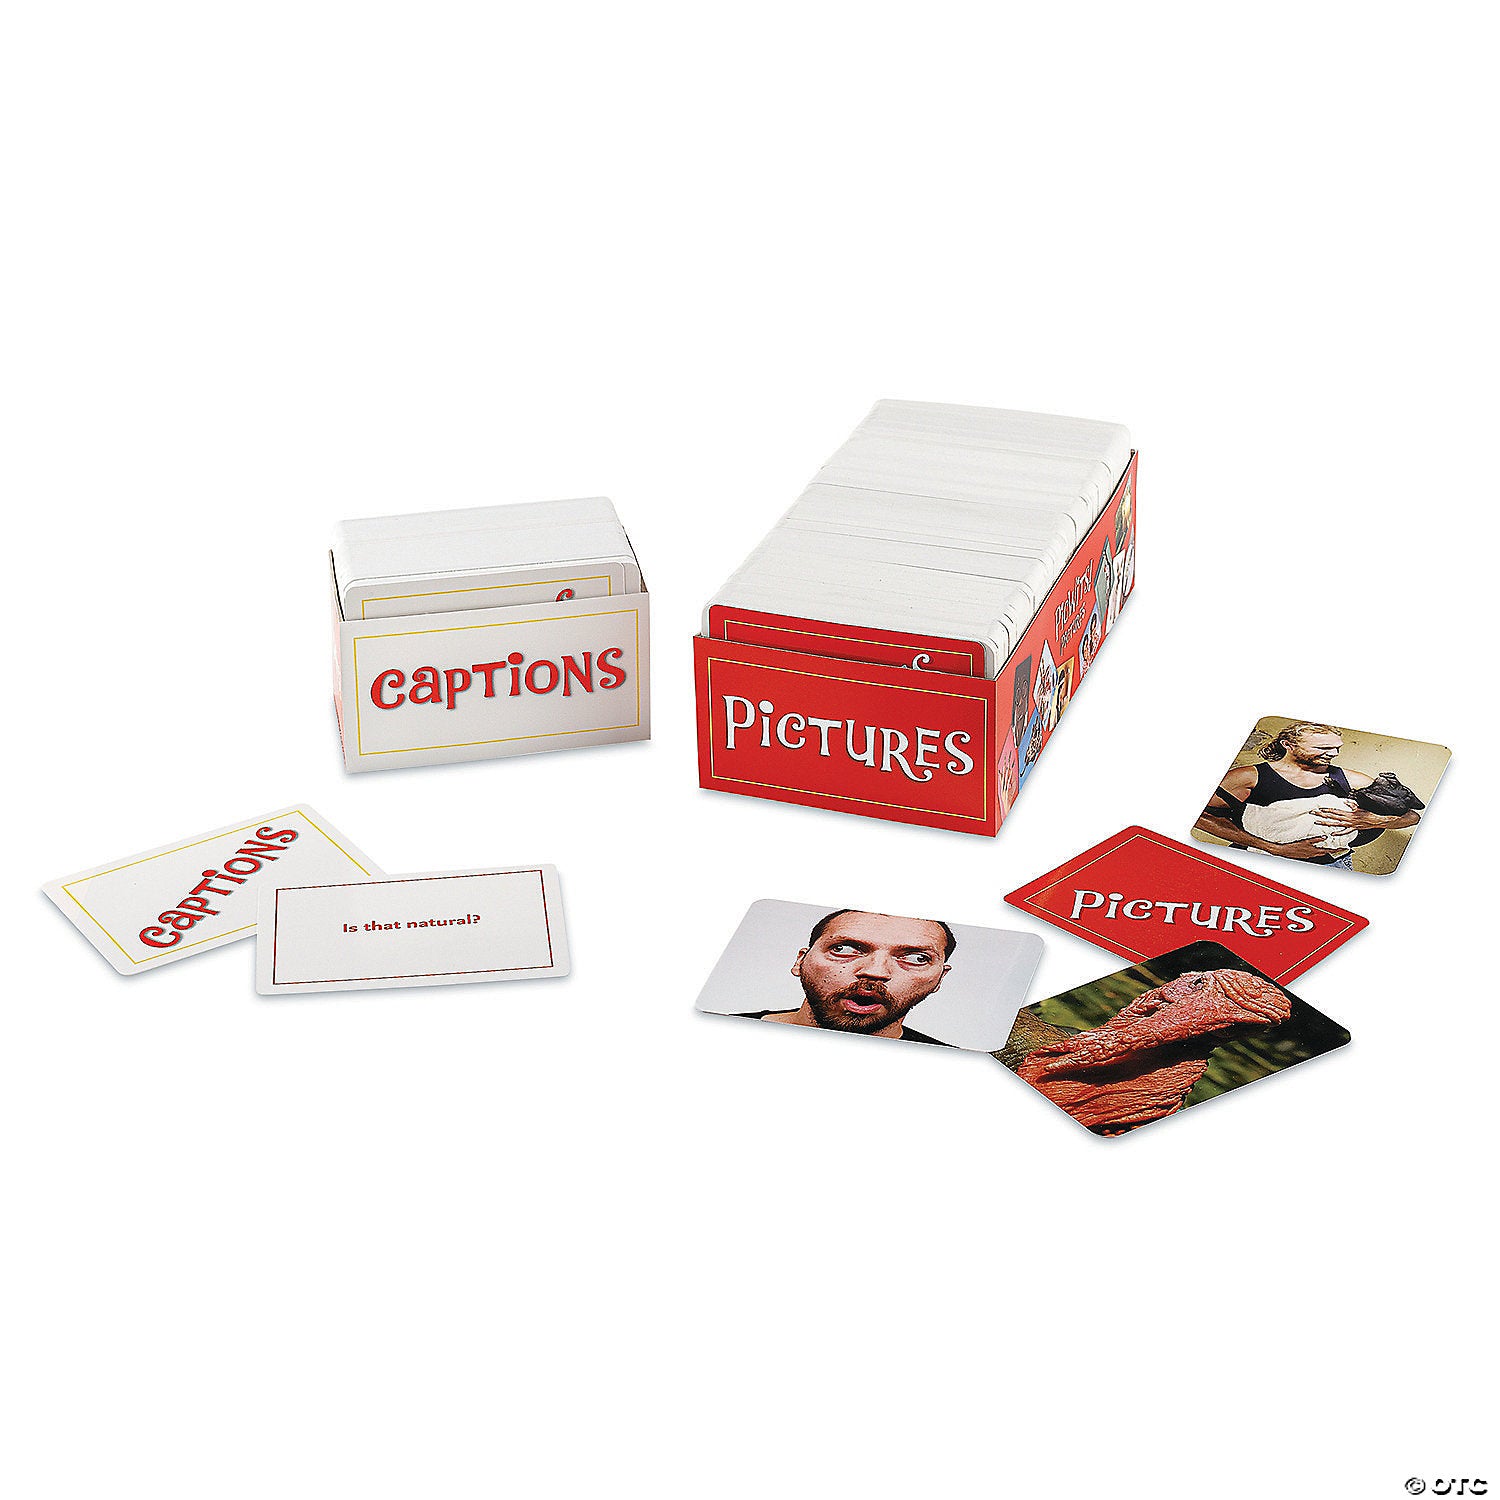 Picwits! - The Picture-Perfect Party Game    